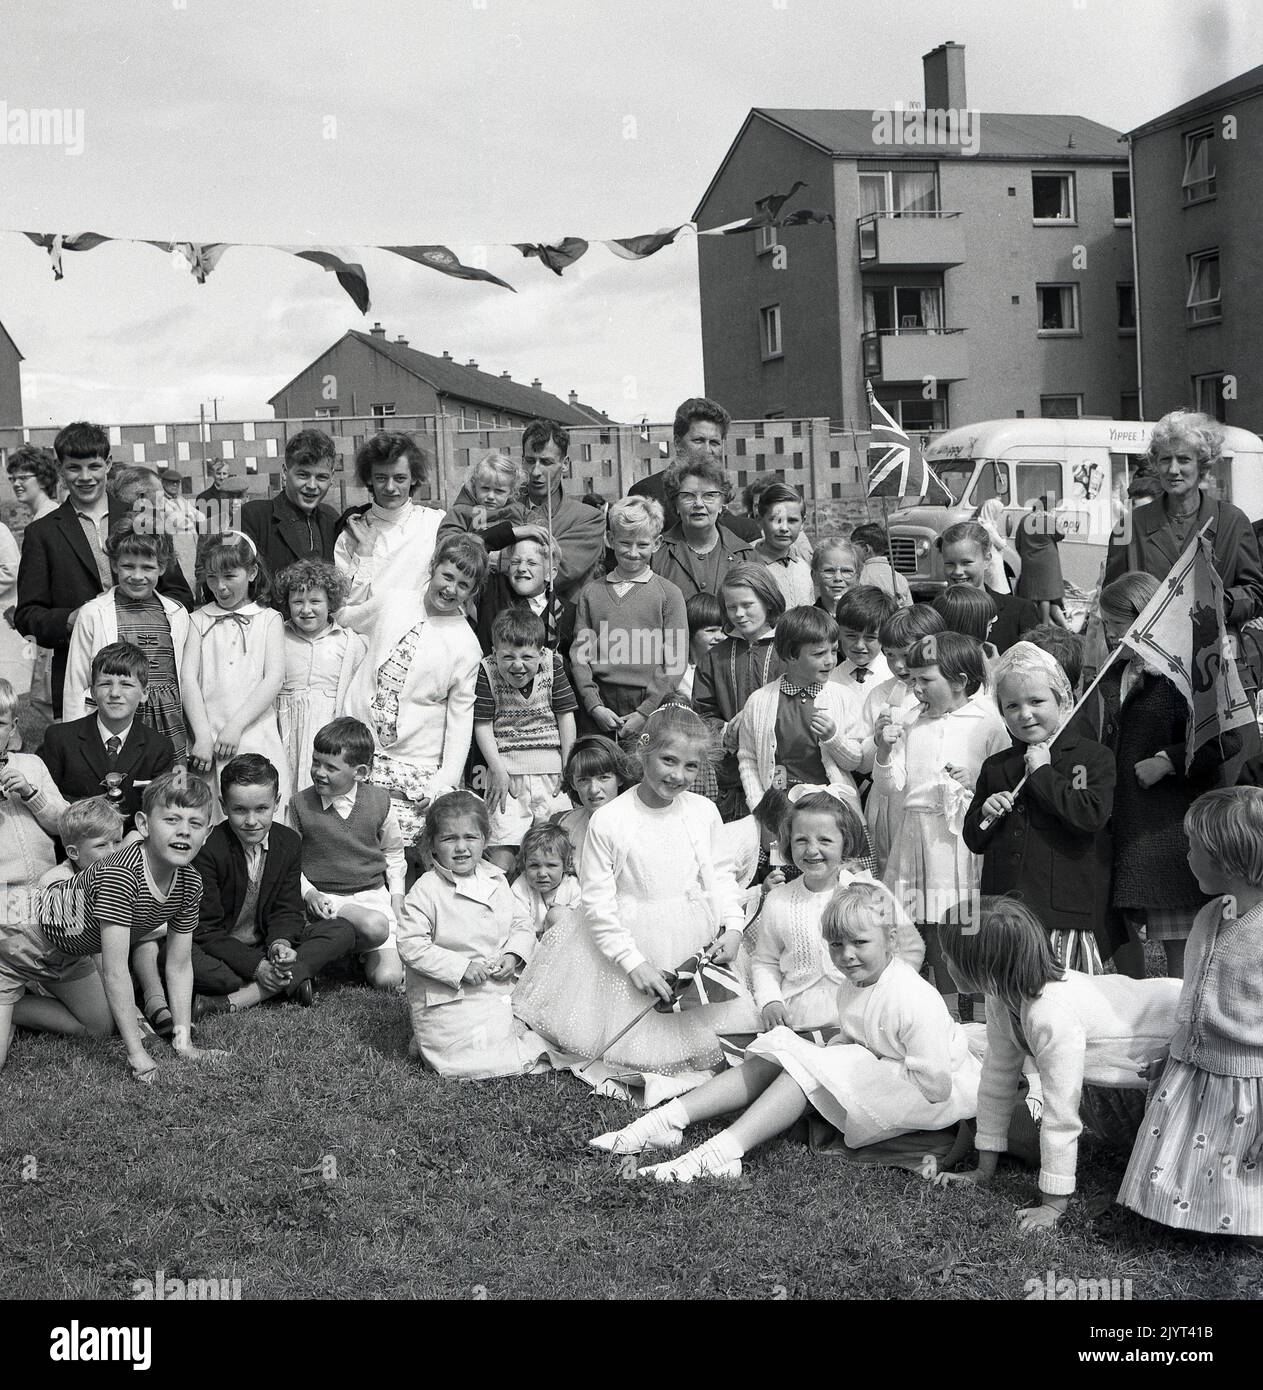 1965, historical, children and adults gathered for a group picture, some holding flags, including a union jack, after taking part in the North Queensferry gala day, Fife, Scotland, UK. A Mr 'whippy' ice-cream van of the era is seen in the background. Stock Photo